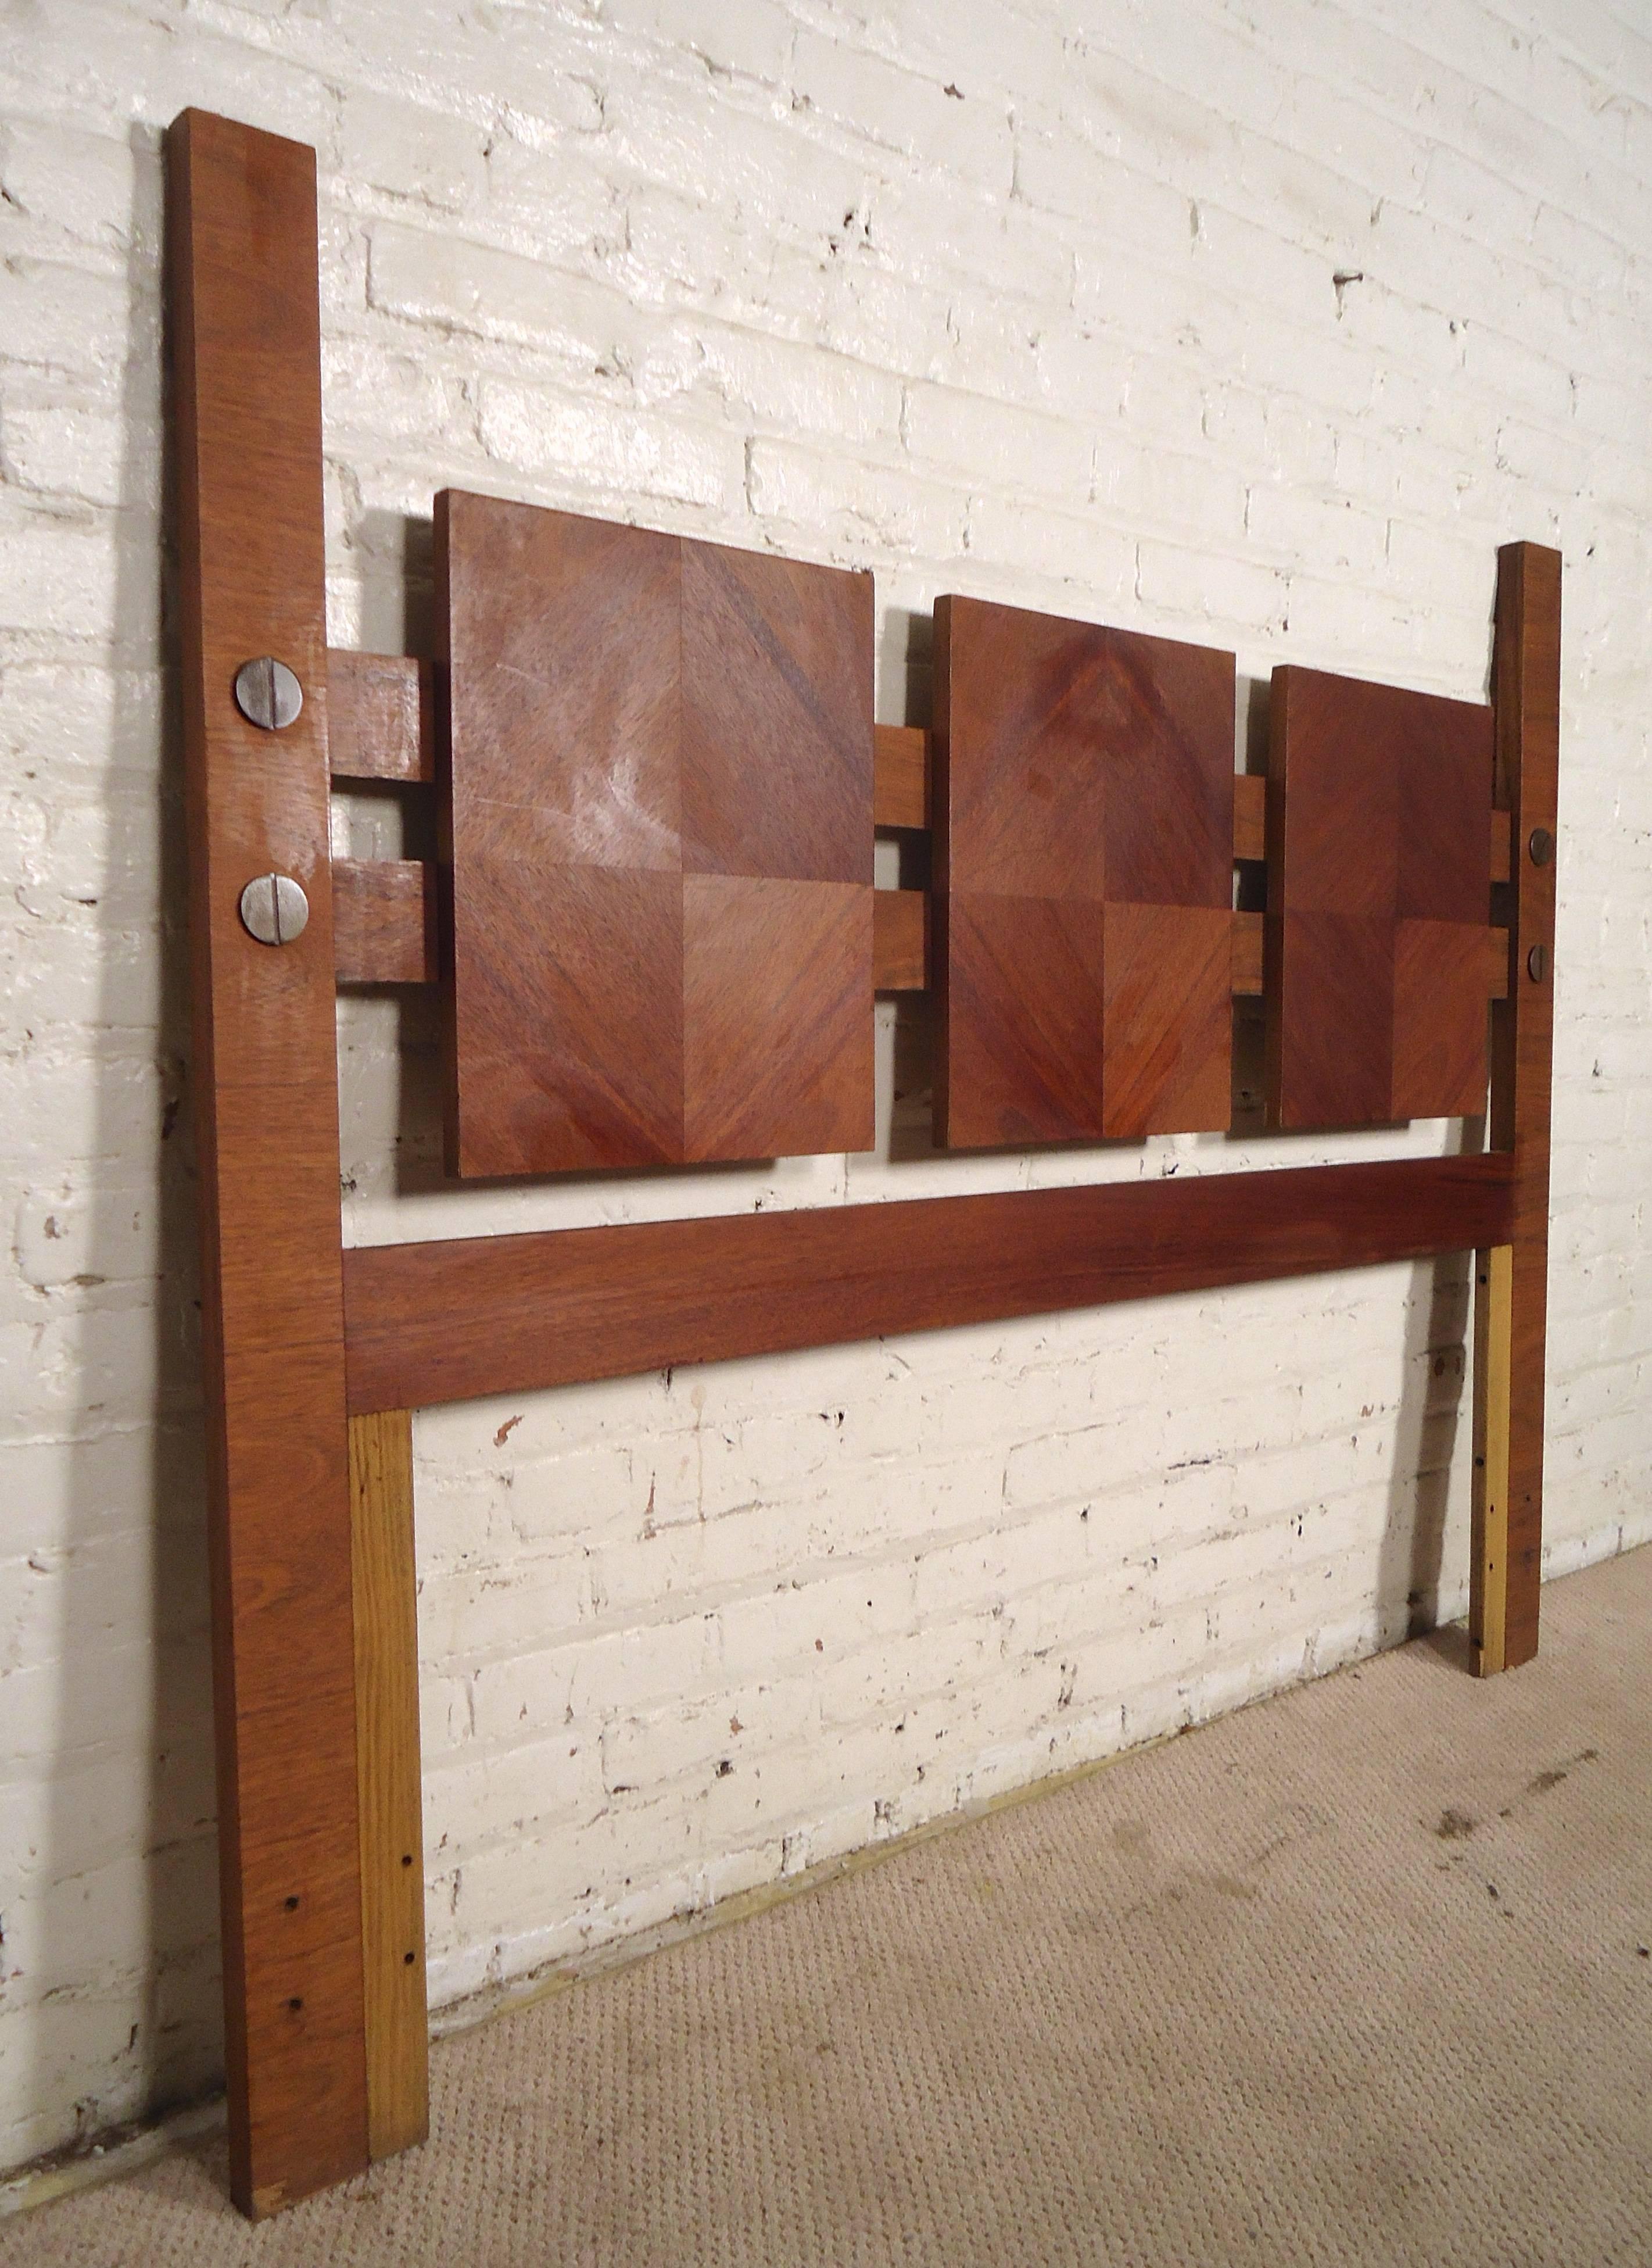 Queen size headboard featuring diamond shape walnut grain panels and large exposed brass screw heads.

(Please confirm item location - NY or NJ - with dealer)